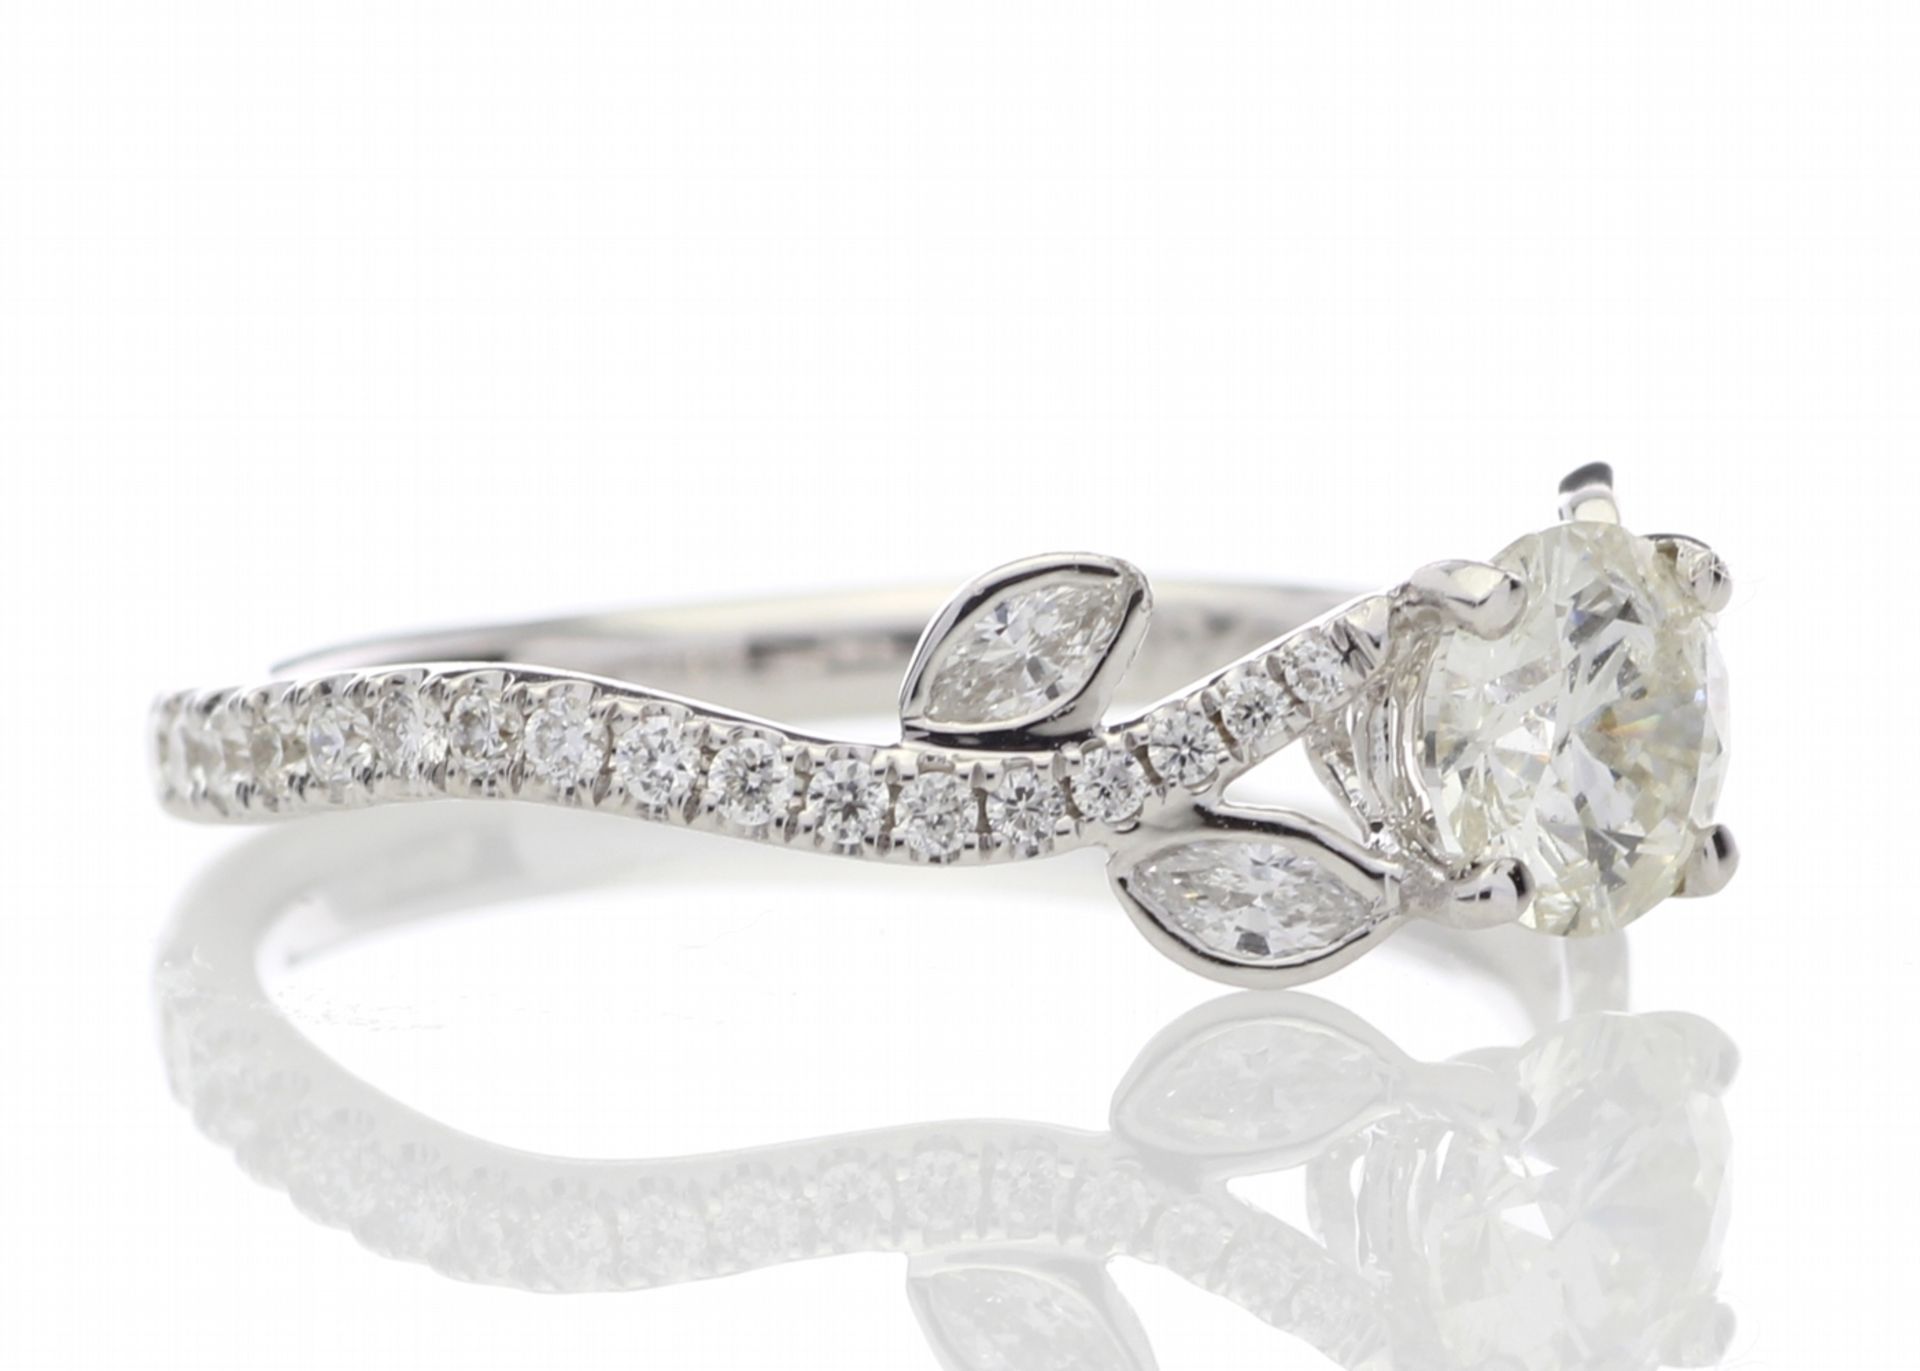 18ct White Gold Single Stone Diamond Ring With Stone Set Shoulders (0.55) 0.91 Carats - Image 4 of 5